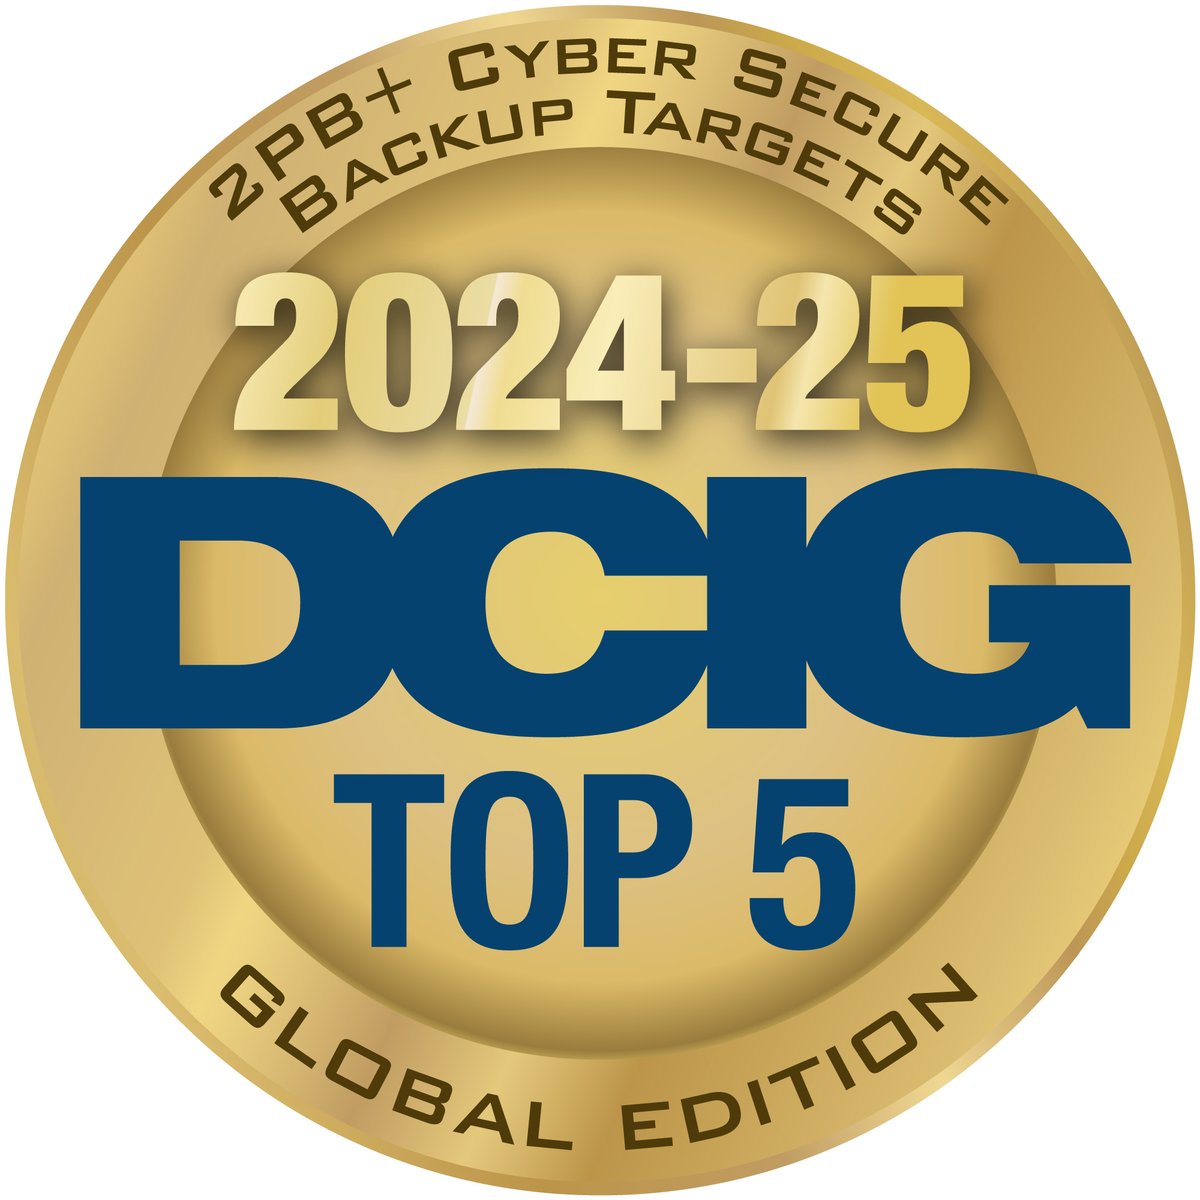 Congrats to @ExaGrid EX189 on achieving #TOP5 recognition in the 2024-25 DCIG TOP 5 2PB+ Cyber Secure Backup Target Global Edition Report! Get the report here: bit.ly/49pk7yW #Backup #BackupAppliance #Ransomware #Security,